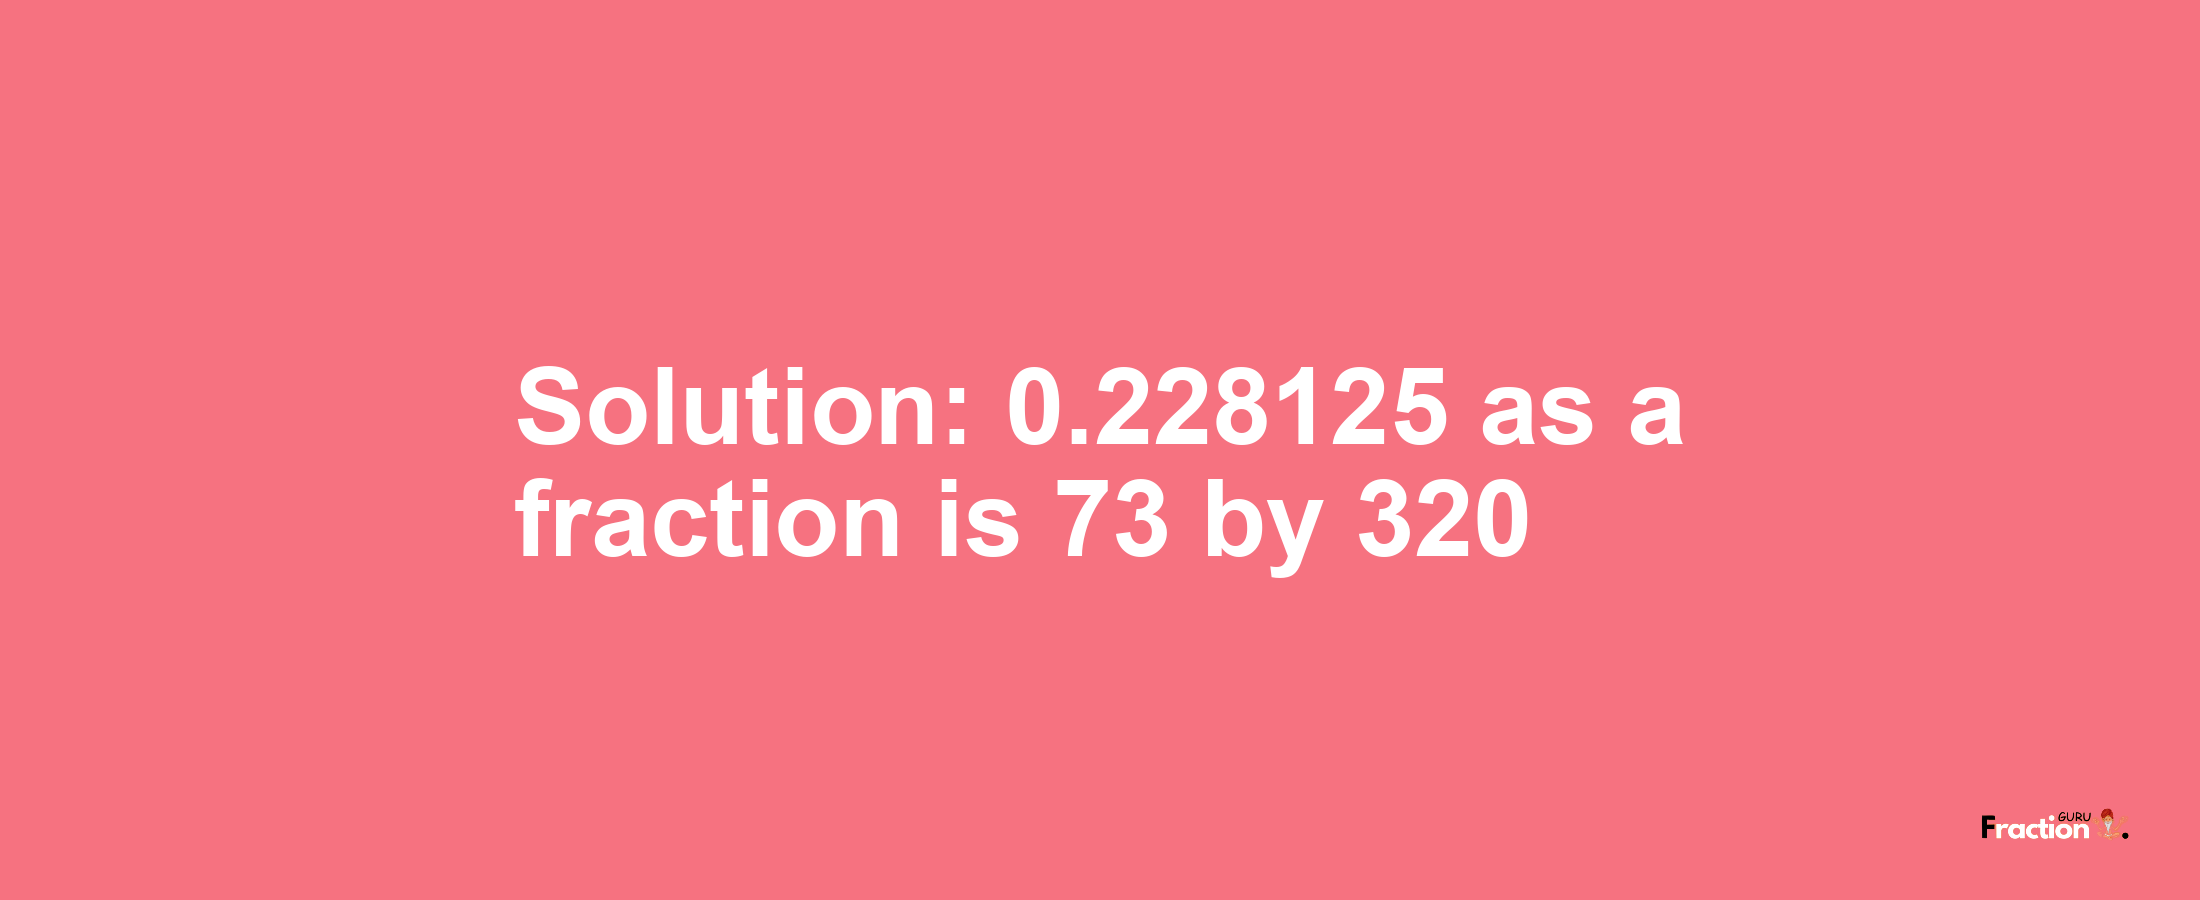 Solution:0.228125 as a fraction is 73/320